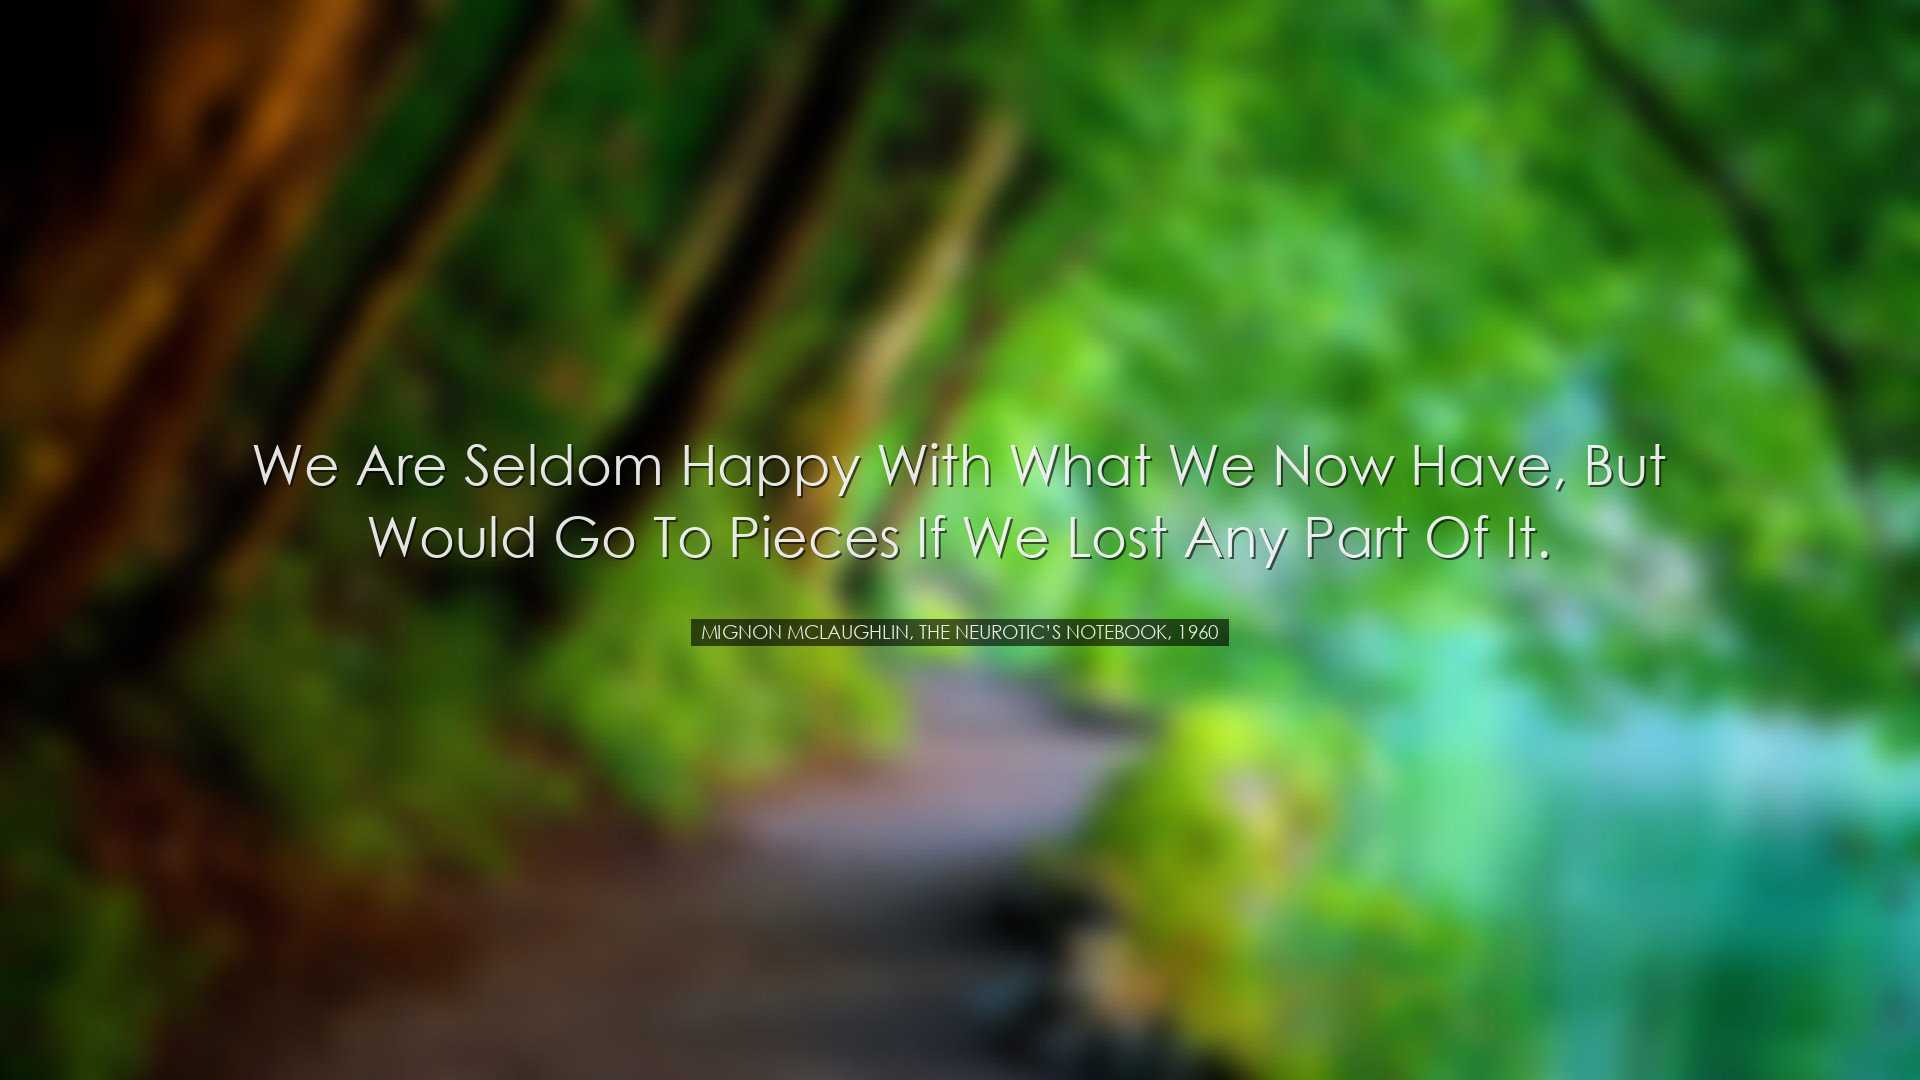 We are seldom happy with what we now have, but would go to pieces